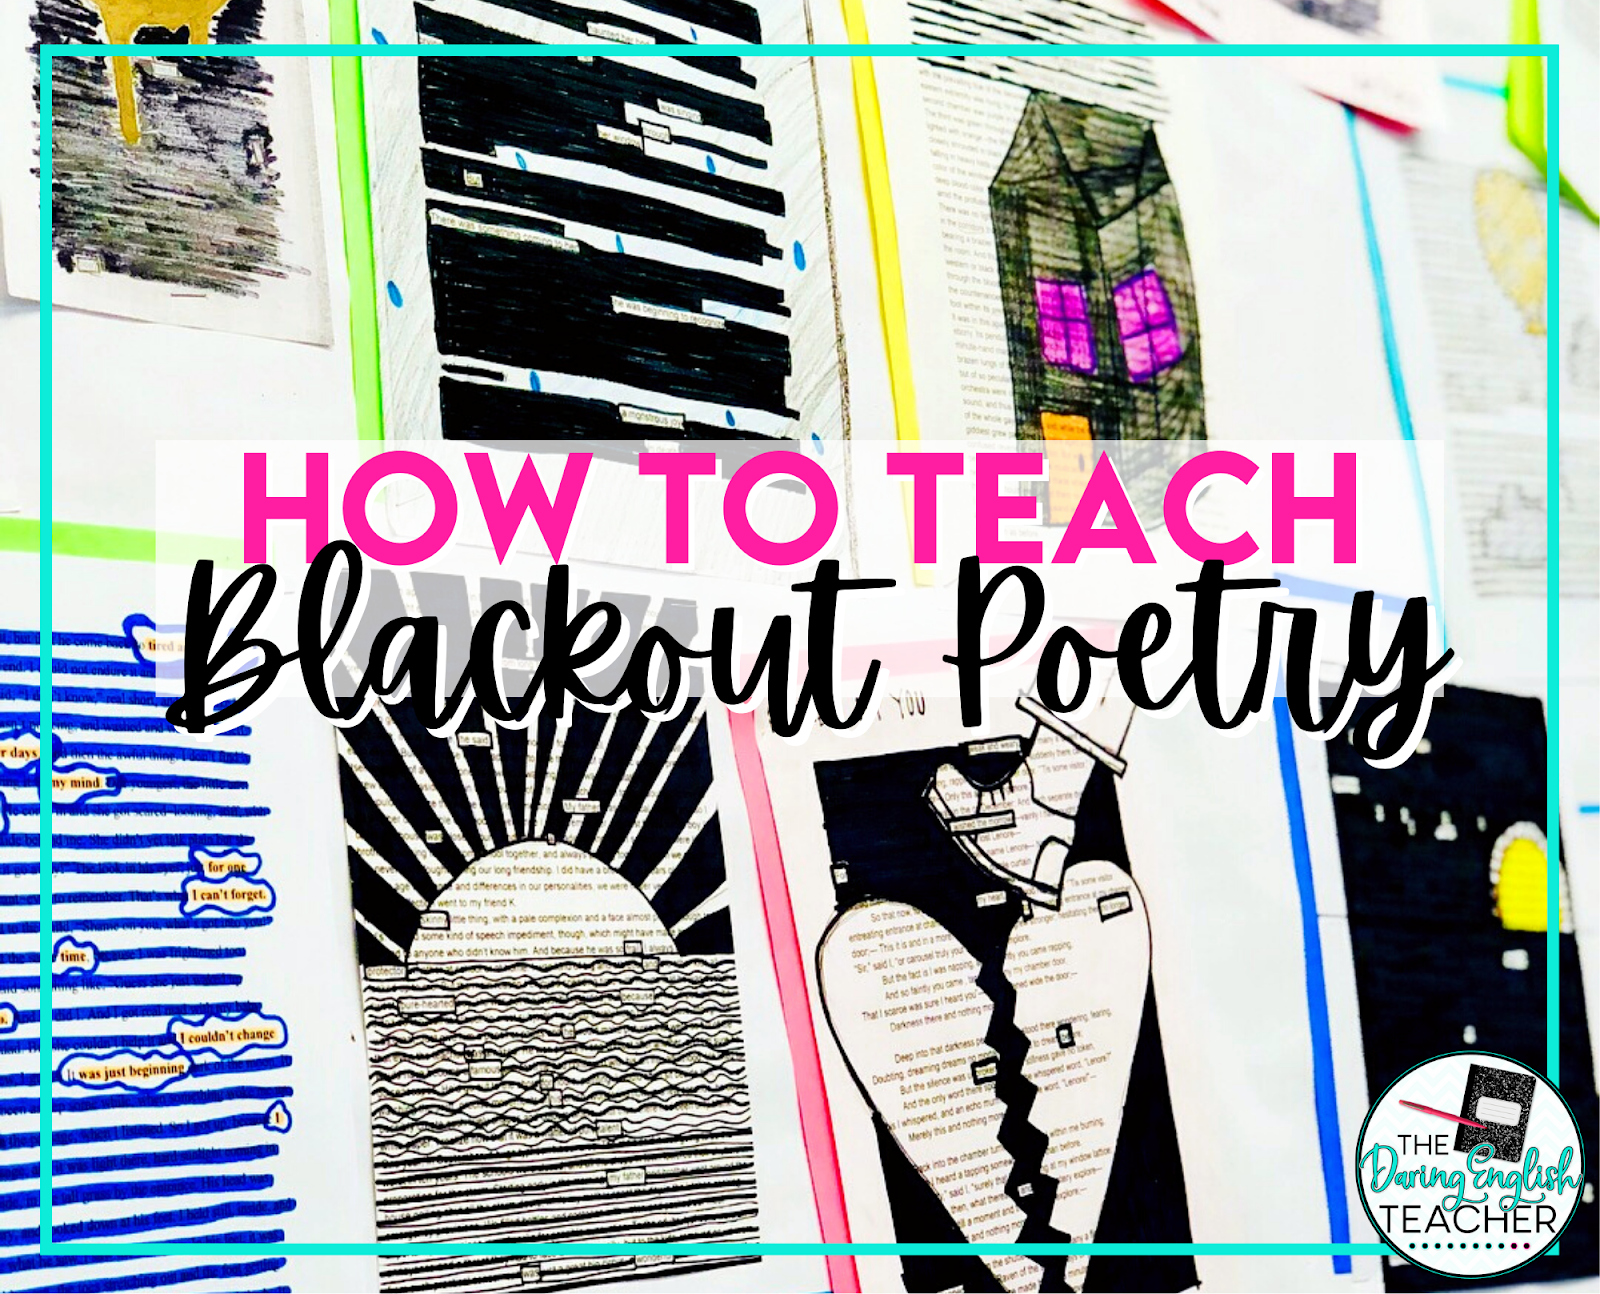 How to Teach Blackout Poetry - teaching blackout poetry in middle school ELA and high school English. 